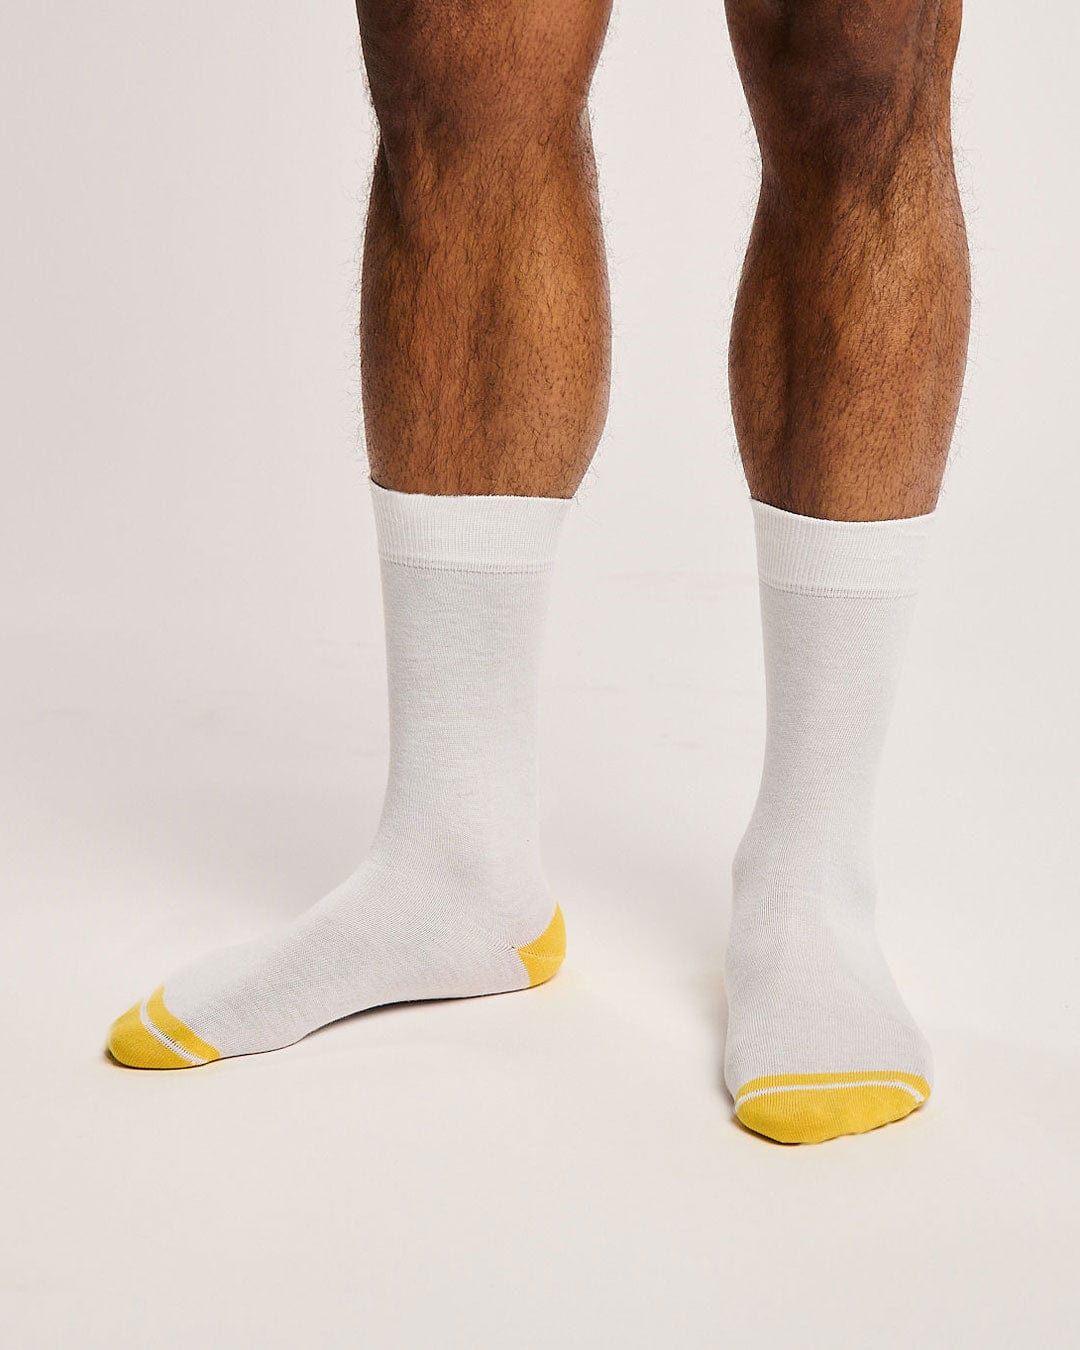 Sustainable white socks. Classic white socks with seamless toes